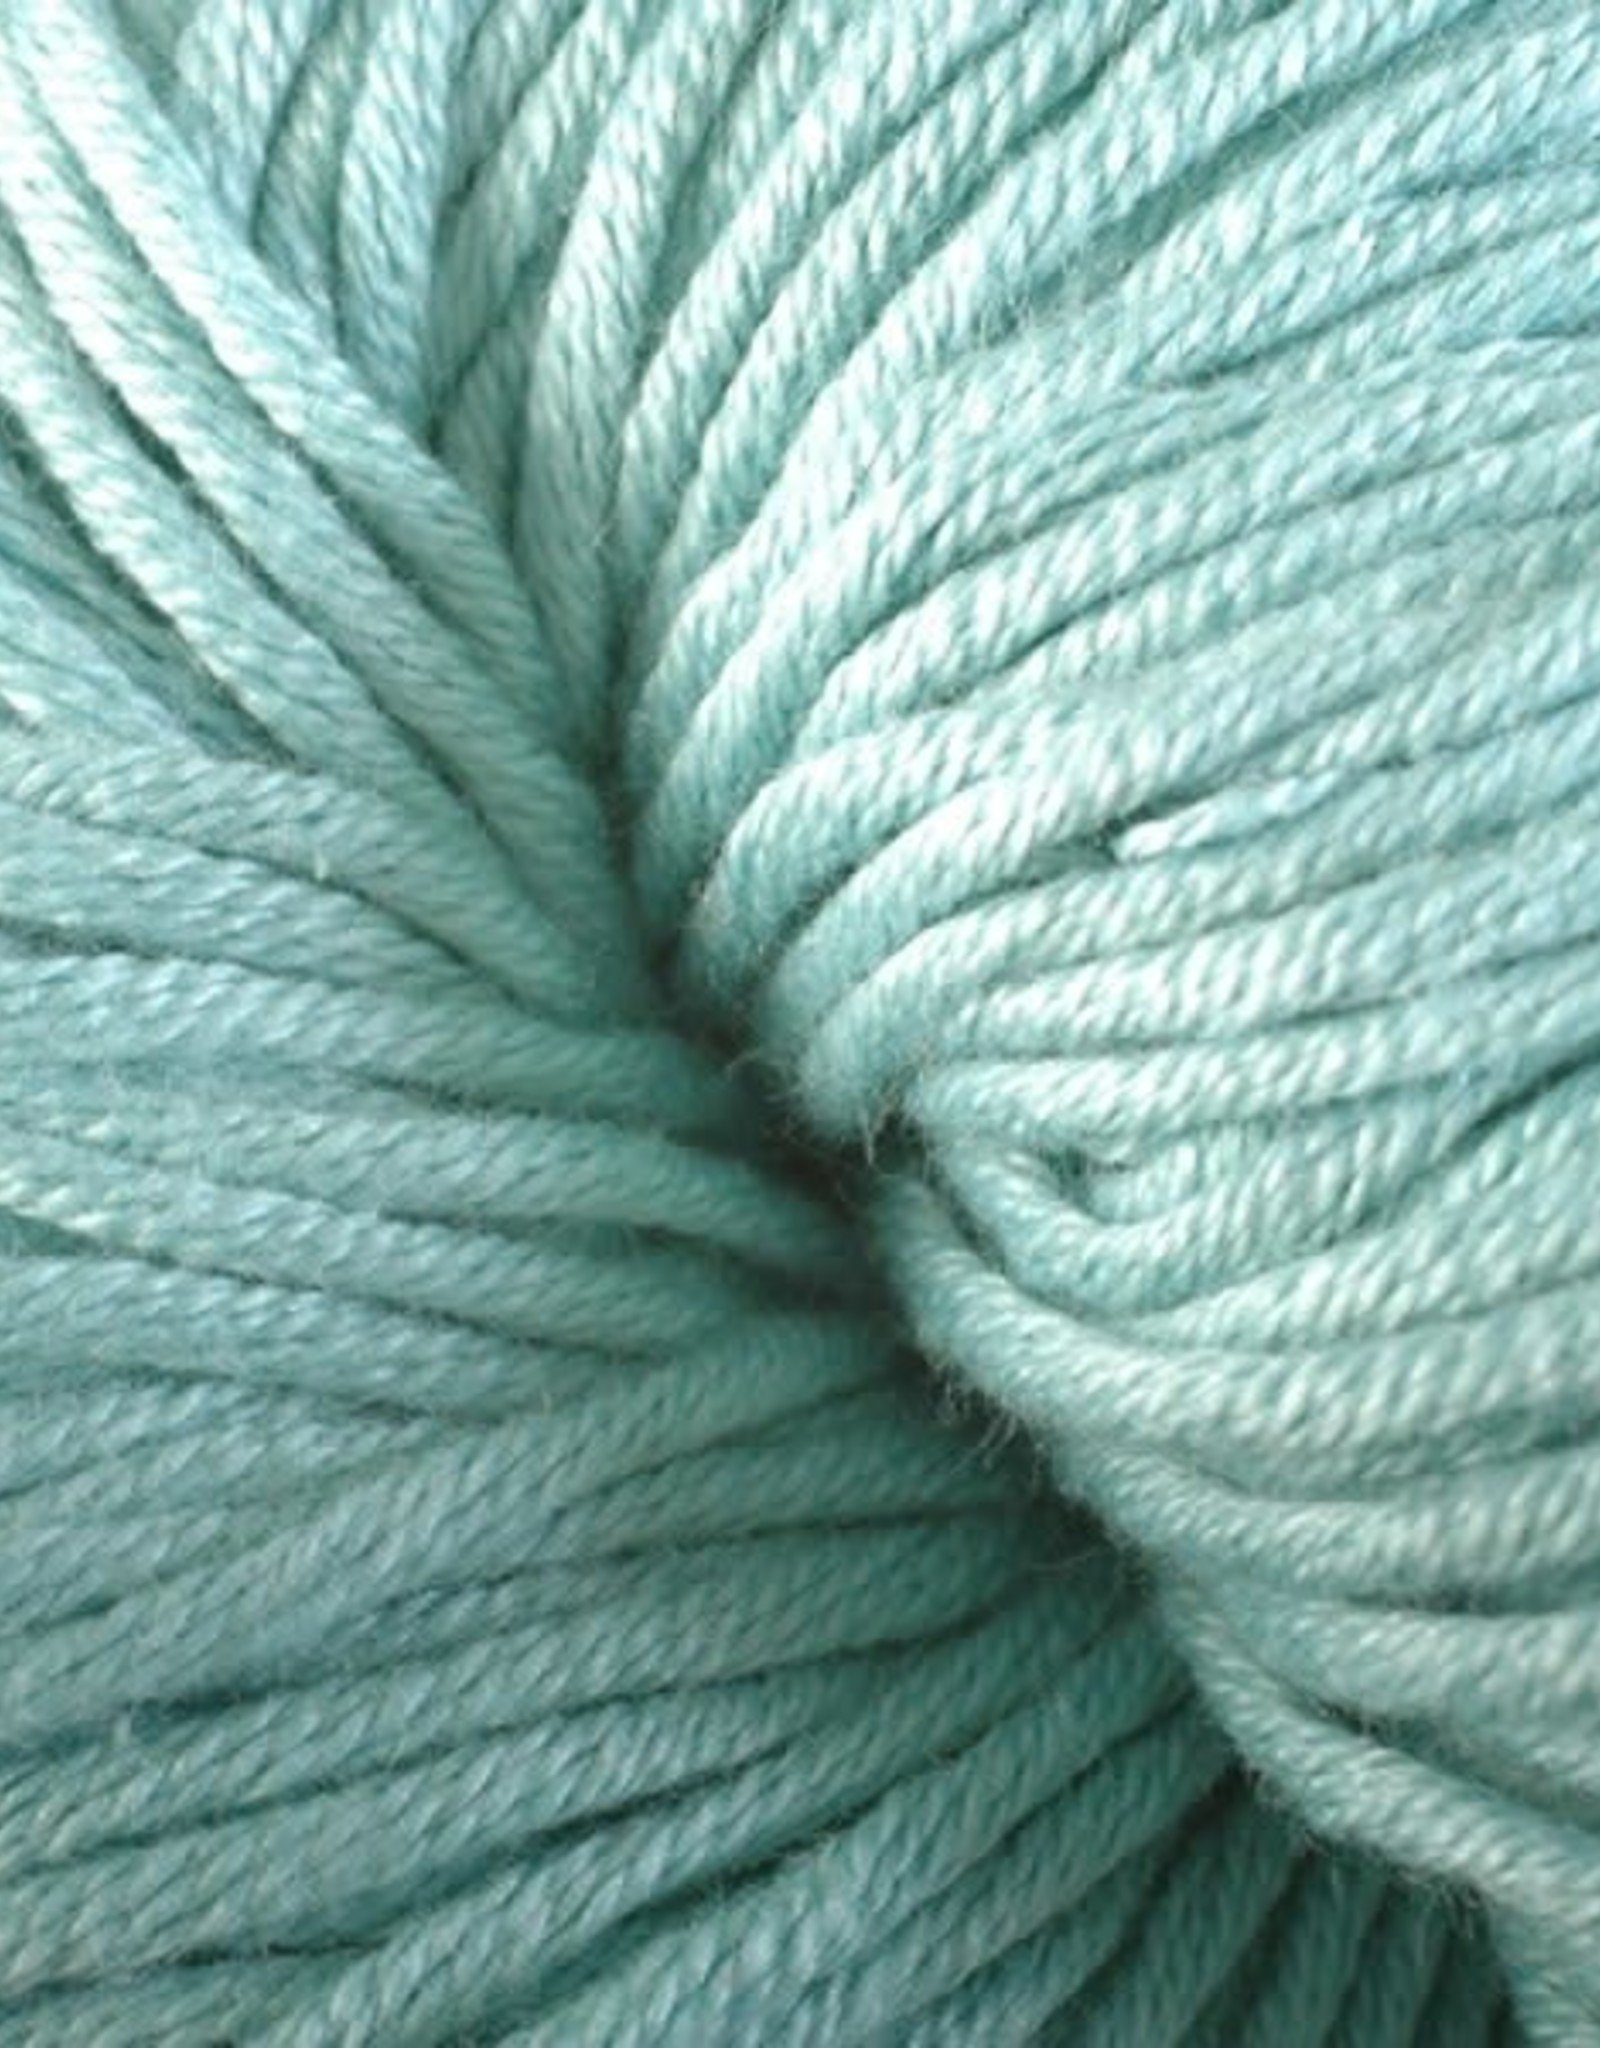 Berroco Modern Cotton  Worsted by Berroco Color Group 2